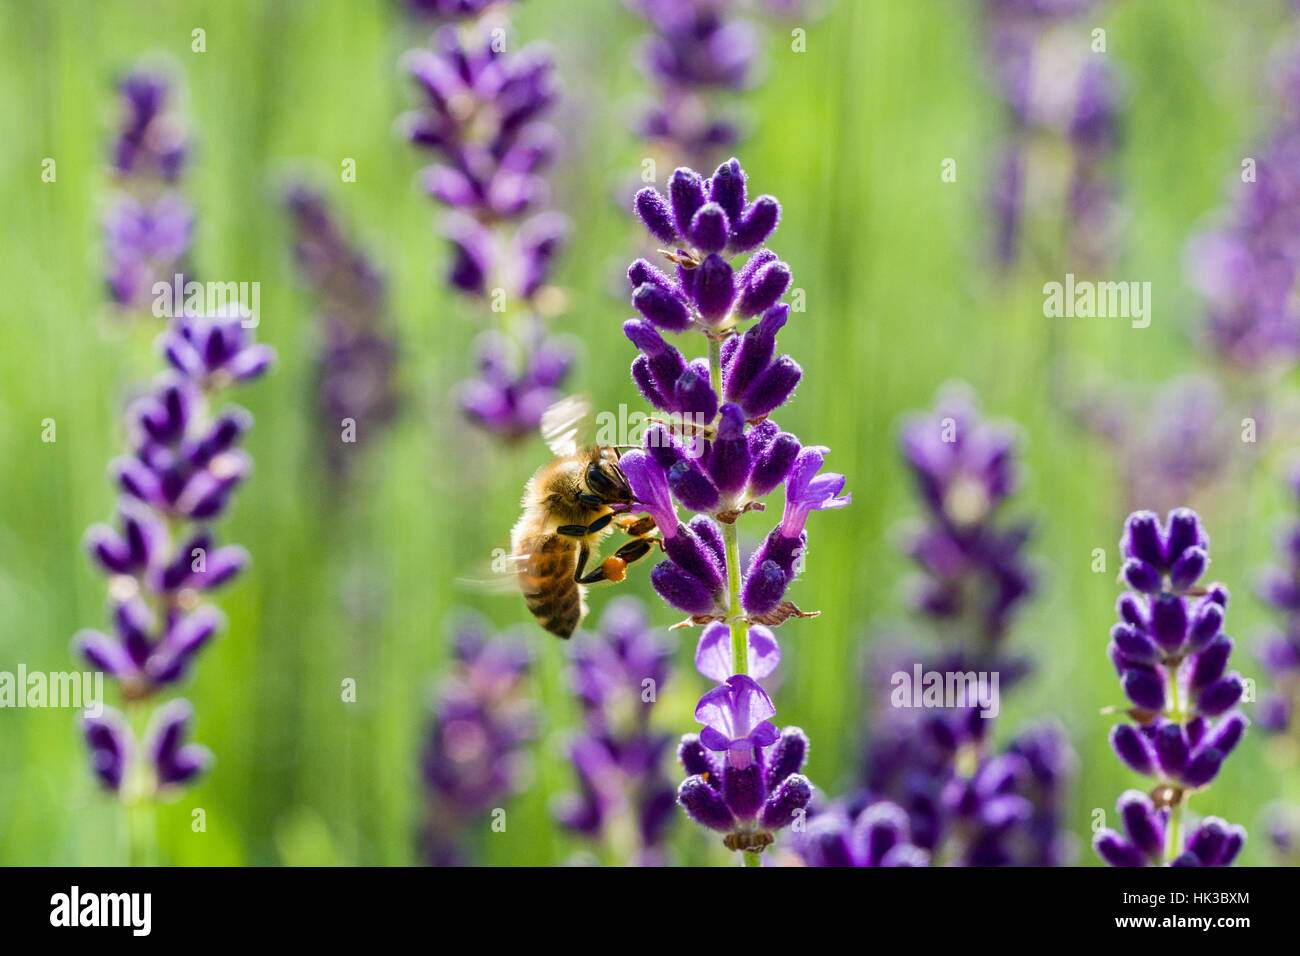 A Carniolan honey bee (Apis mellifera carnica) is collecting nectar at a purple Lavender (Lavandula) blossom Stock Photo